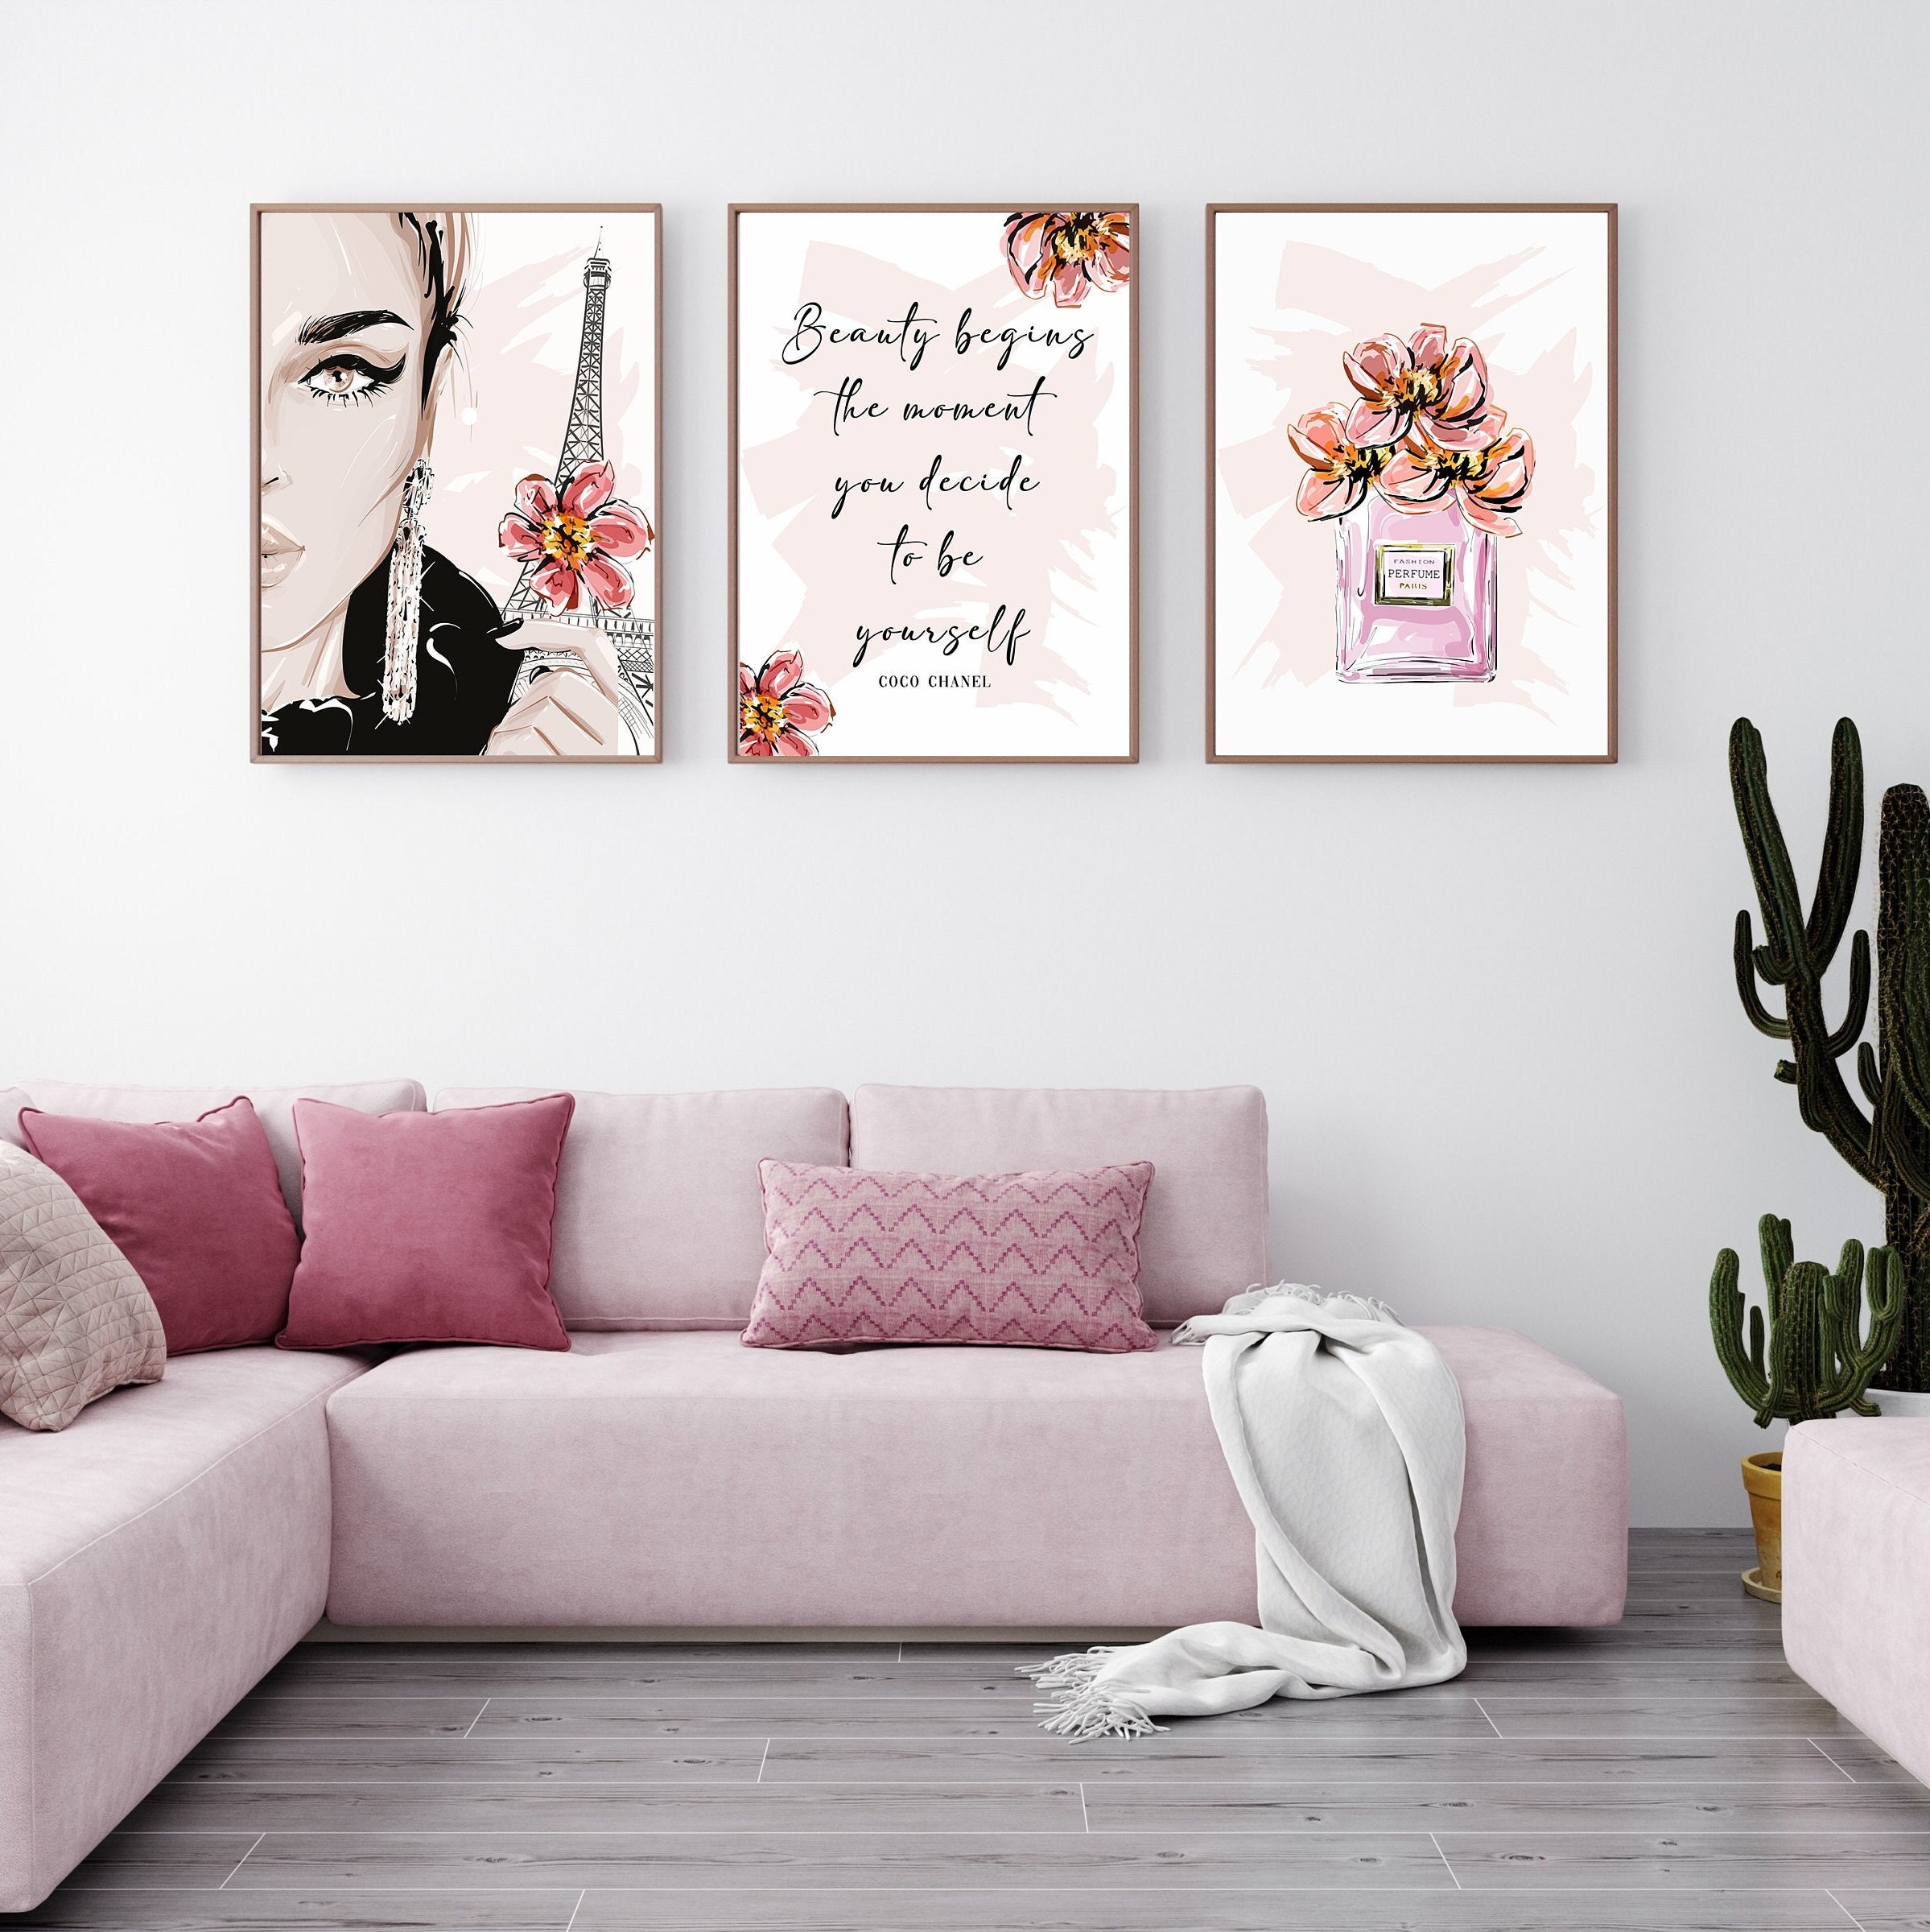 Glam Fashion Wall Art Prints Room Decor, Makeup Art Pictures Wall